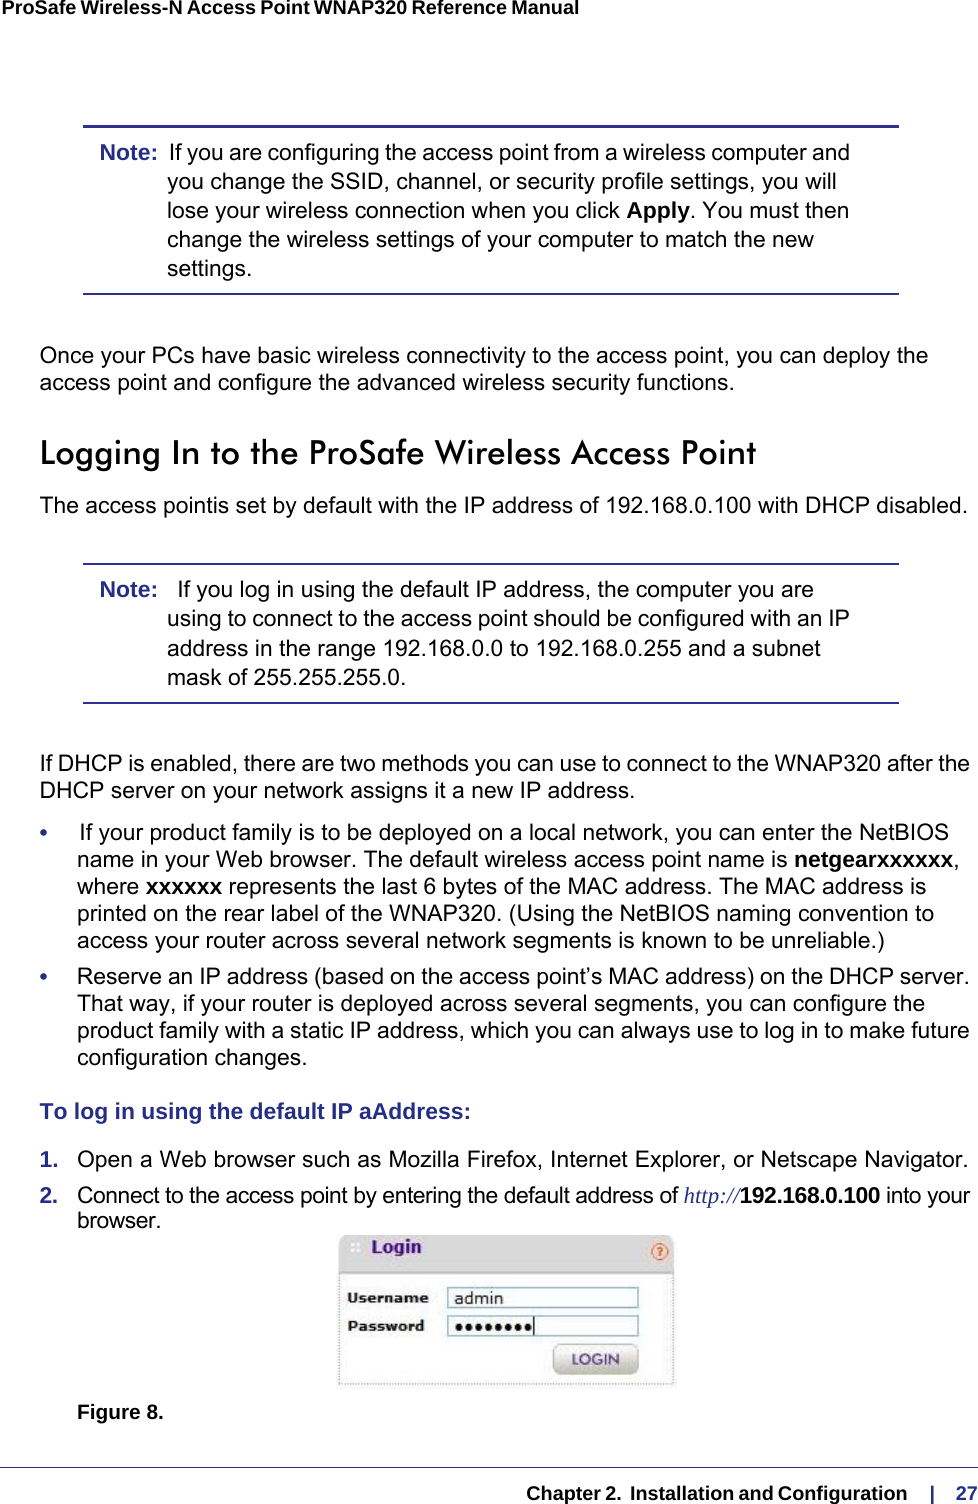   Chapter 2.  Installation and Configuration     |    27ProSafe Wireless-N Access Point WNAP320 Reference Manual Note:  If you are configuring the access point from a wireless computer and you change the SSID, channel, or security profile settings, you will lose your wireless connection when you click Apply. You must then change the wireless settings of your computer to match the new settings.Once your PCs have basic wireless connectivity to the access point, you can deploy the access point and configure the advanced wireless security functions.Logging In to the ProSafe Wireless Access PointThe access pointis set by default with the IP address of 192.168.0.100 with DHCP disabled. Note:   If you log in using the default IP address, the computer you are using to connect to the access point should be configured with an IP address in the range 192.168.0.0 to 192.168.0.255 and a subnet mask of 255.255.255.0.If DHCP is enabled, there are two methods you can use to connect to the WNAP320 after the DHCP server on your network assigns it a new IP address. •     If your product family is to be deployed on a local network, you can enter the NetBIOS name in your Web browser. The default wireless access point name is netgearxxxxxx, where xxxxxx represents the last 6 bytes of the MAC address. The MAC address is printed on the rear label of the WNAP320. (Using the NetBIOS naming convention to access your router across several network segments is known to be unreliable.)•     Reserve an IP address (based on the access point’s MAC address) on the DHCP server. That way, if your router is deployed across several segments, you can configure the product family with a static IP address, which you can always use to log in to make future configuration changes.To log in using the default IP aAddress:1.  Open a Web browser such as Mozilla Firefox, Internet Explorer, or Netscape Navigator. 2.  Connect to the access point by entering the default address of http://192.168.0.100 into your browser.http://192.168.0.233Figure 8.  